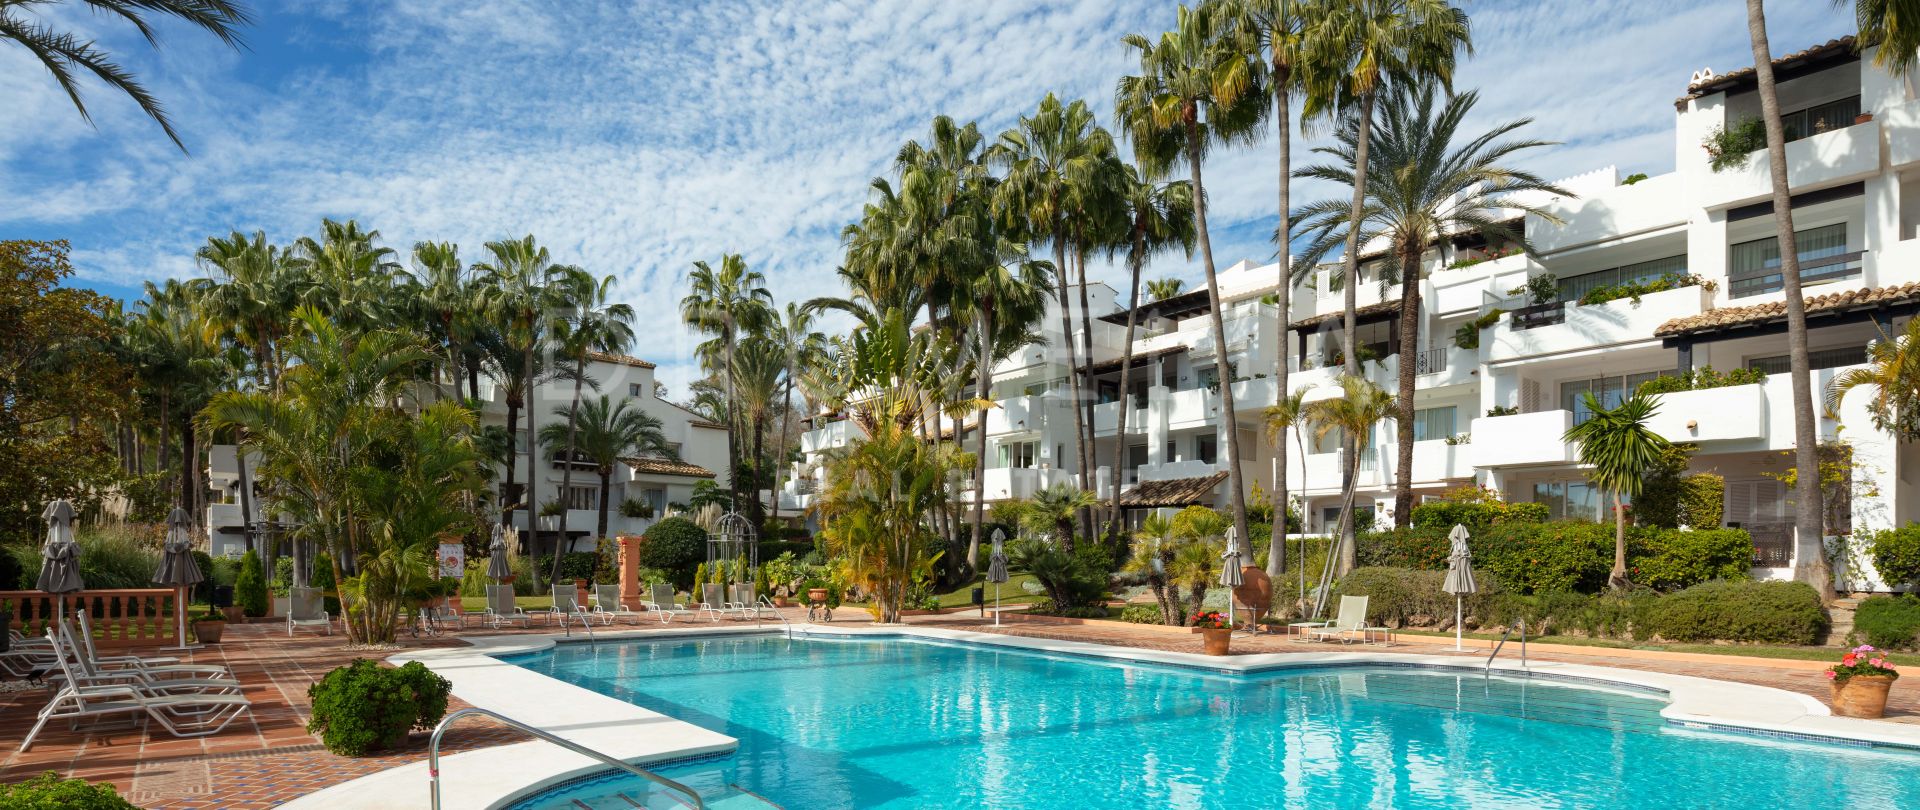 Renovated stylish and modern luxury apartment in classy Marina Puente Romano, Marbella Golden Mile